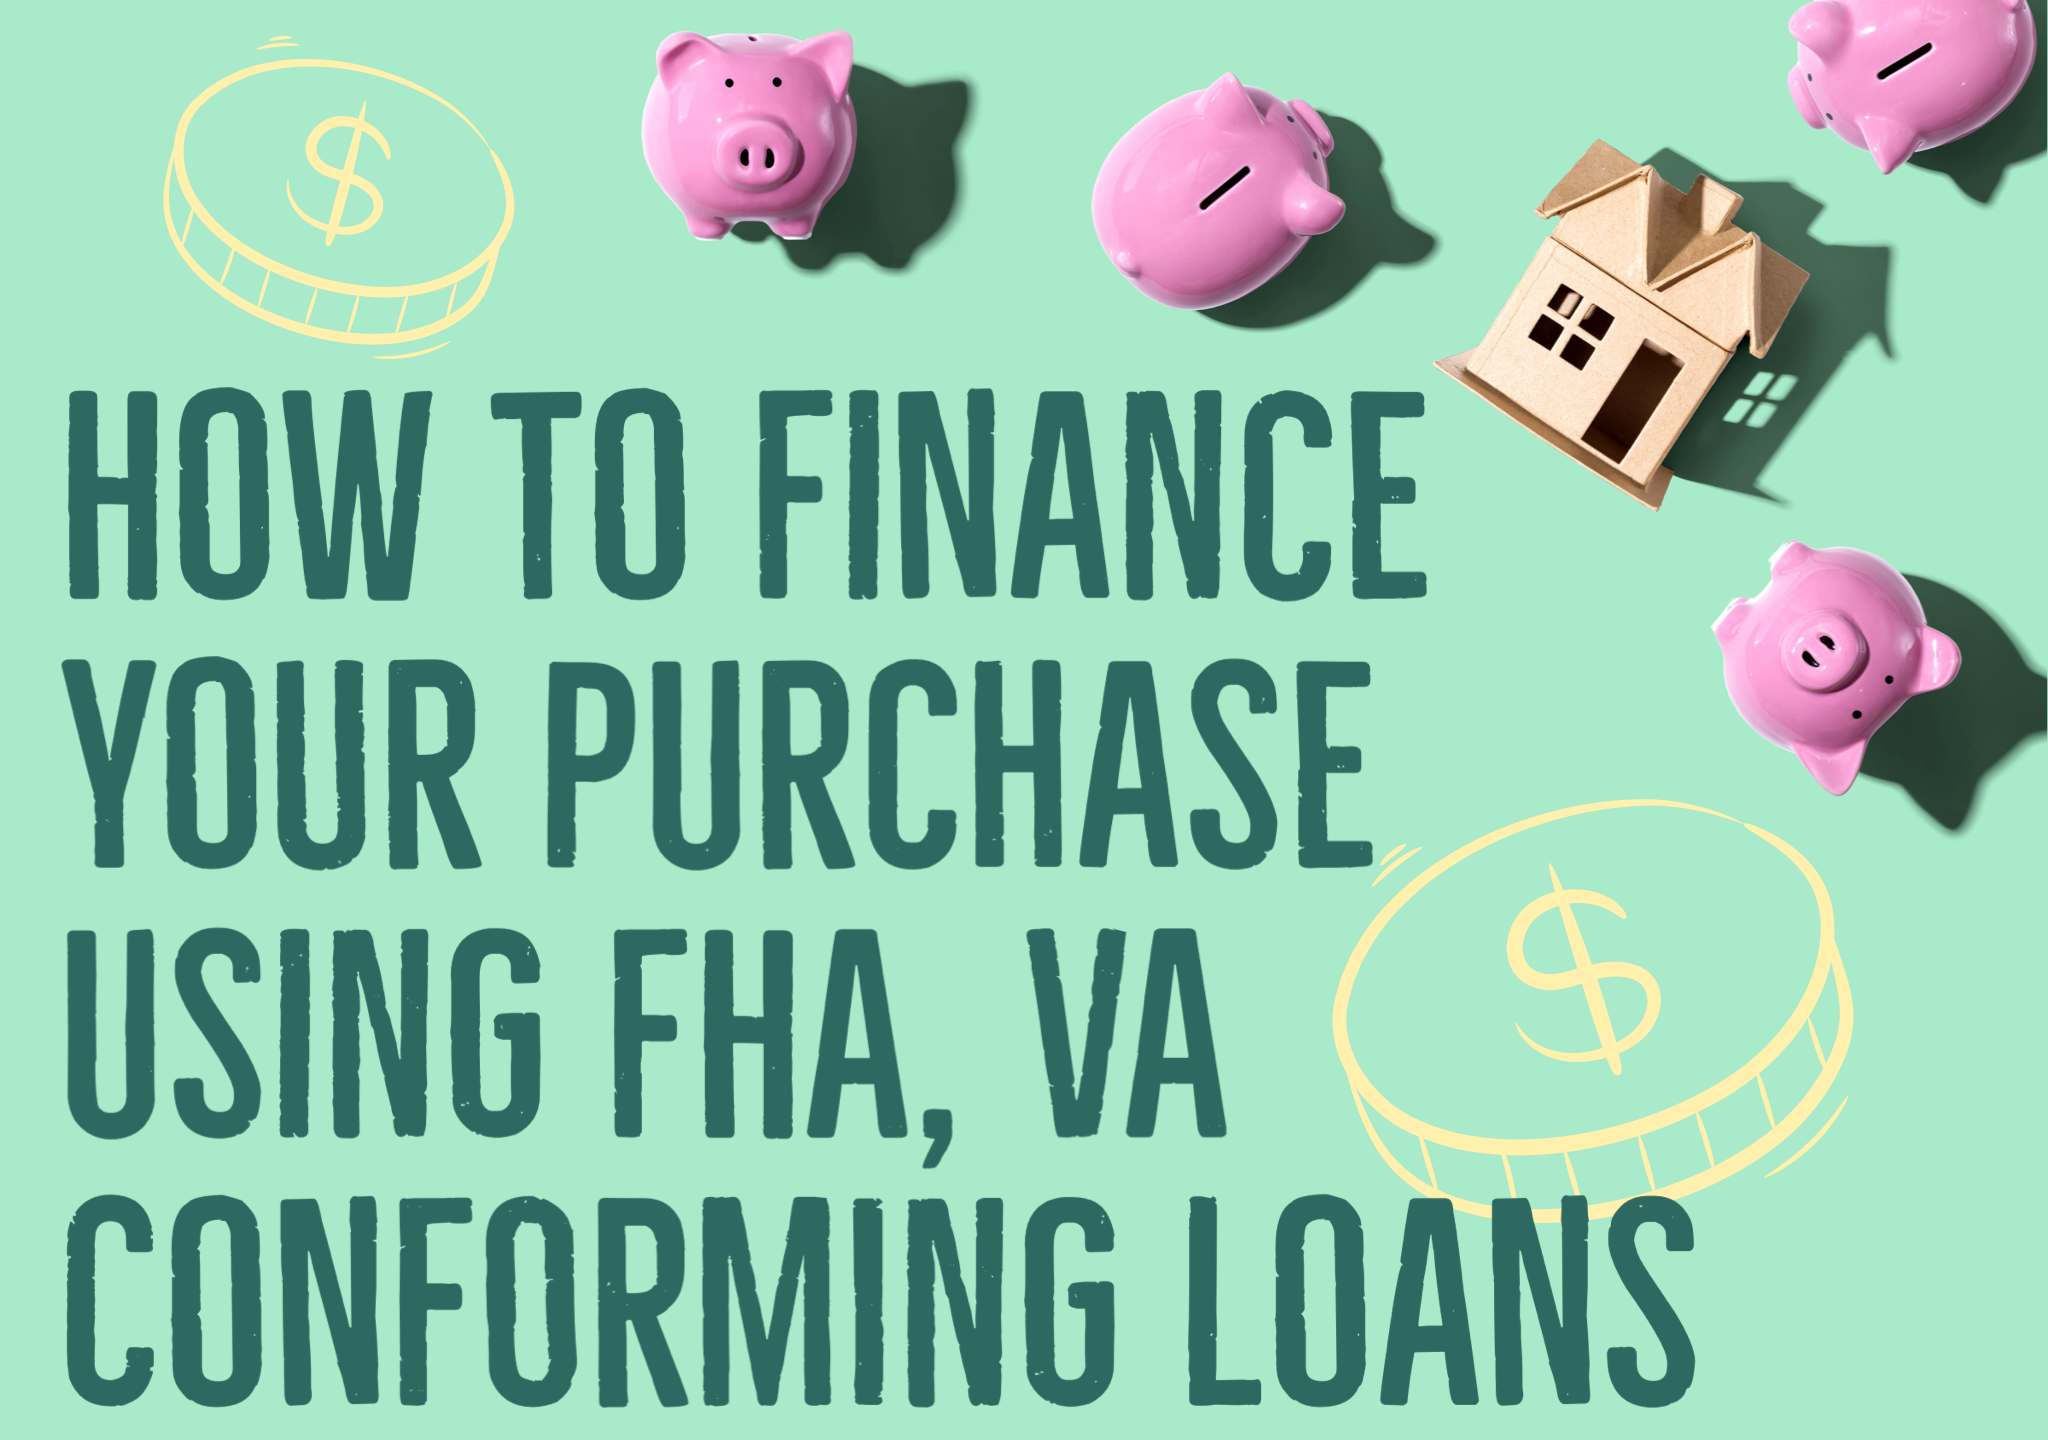 How to Finance Your Purchase Using FHA, VA, Conforming Loans